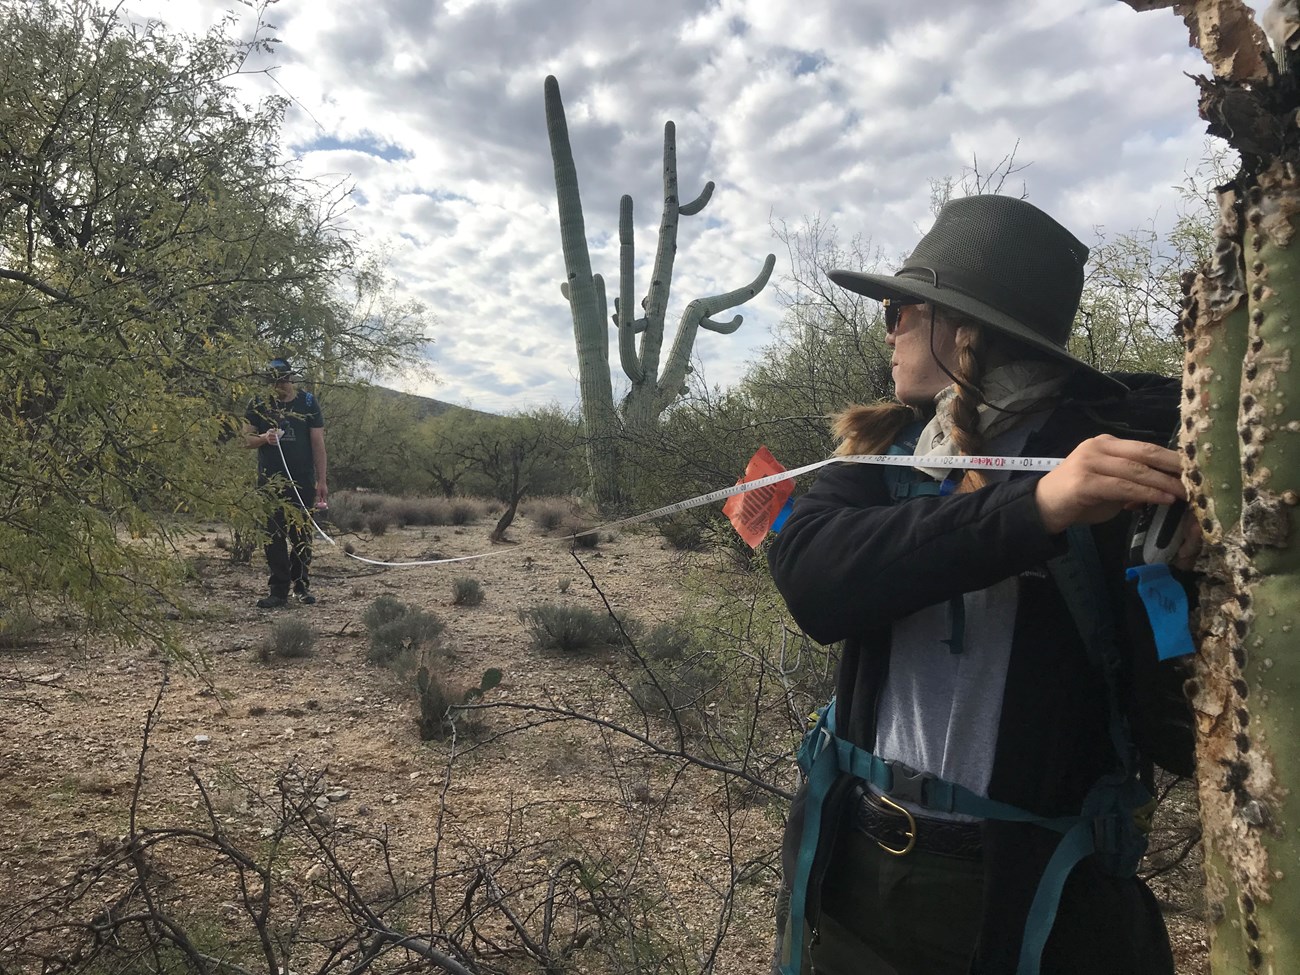 A man communicating to a woman his distance from a saguaro.